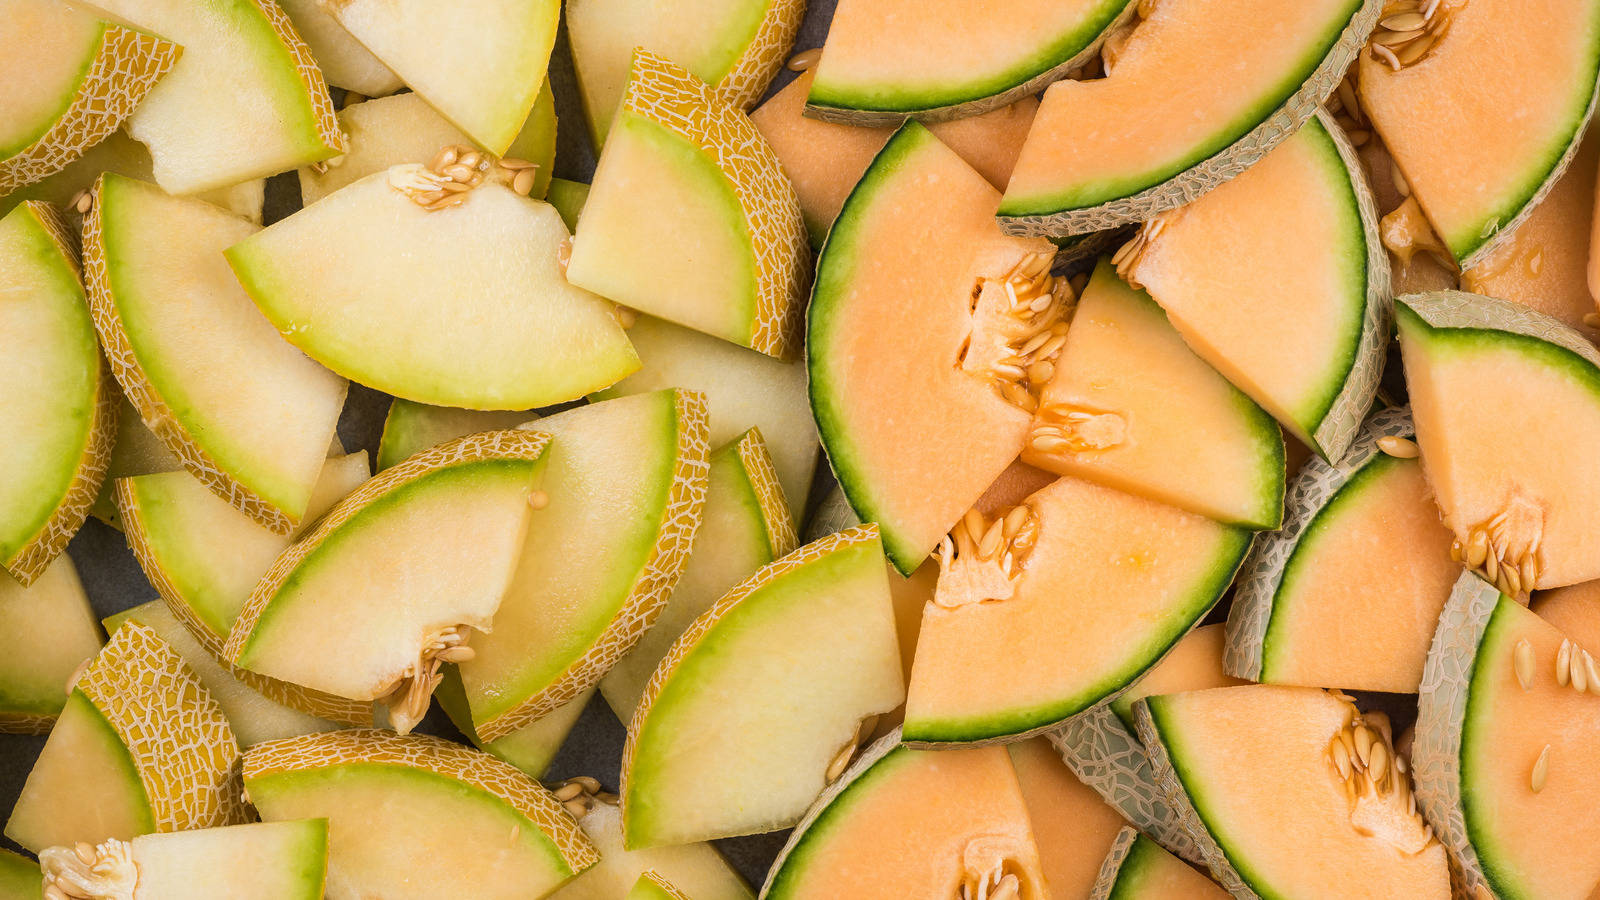 Slices Of Green And Brown Honeydew Melon Wallpaper